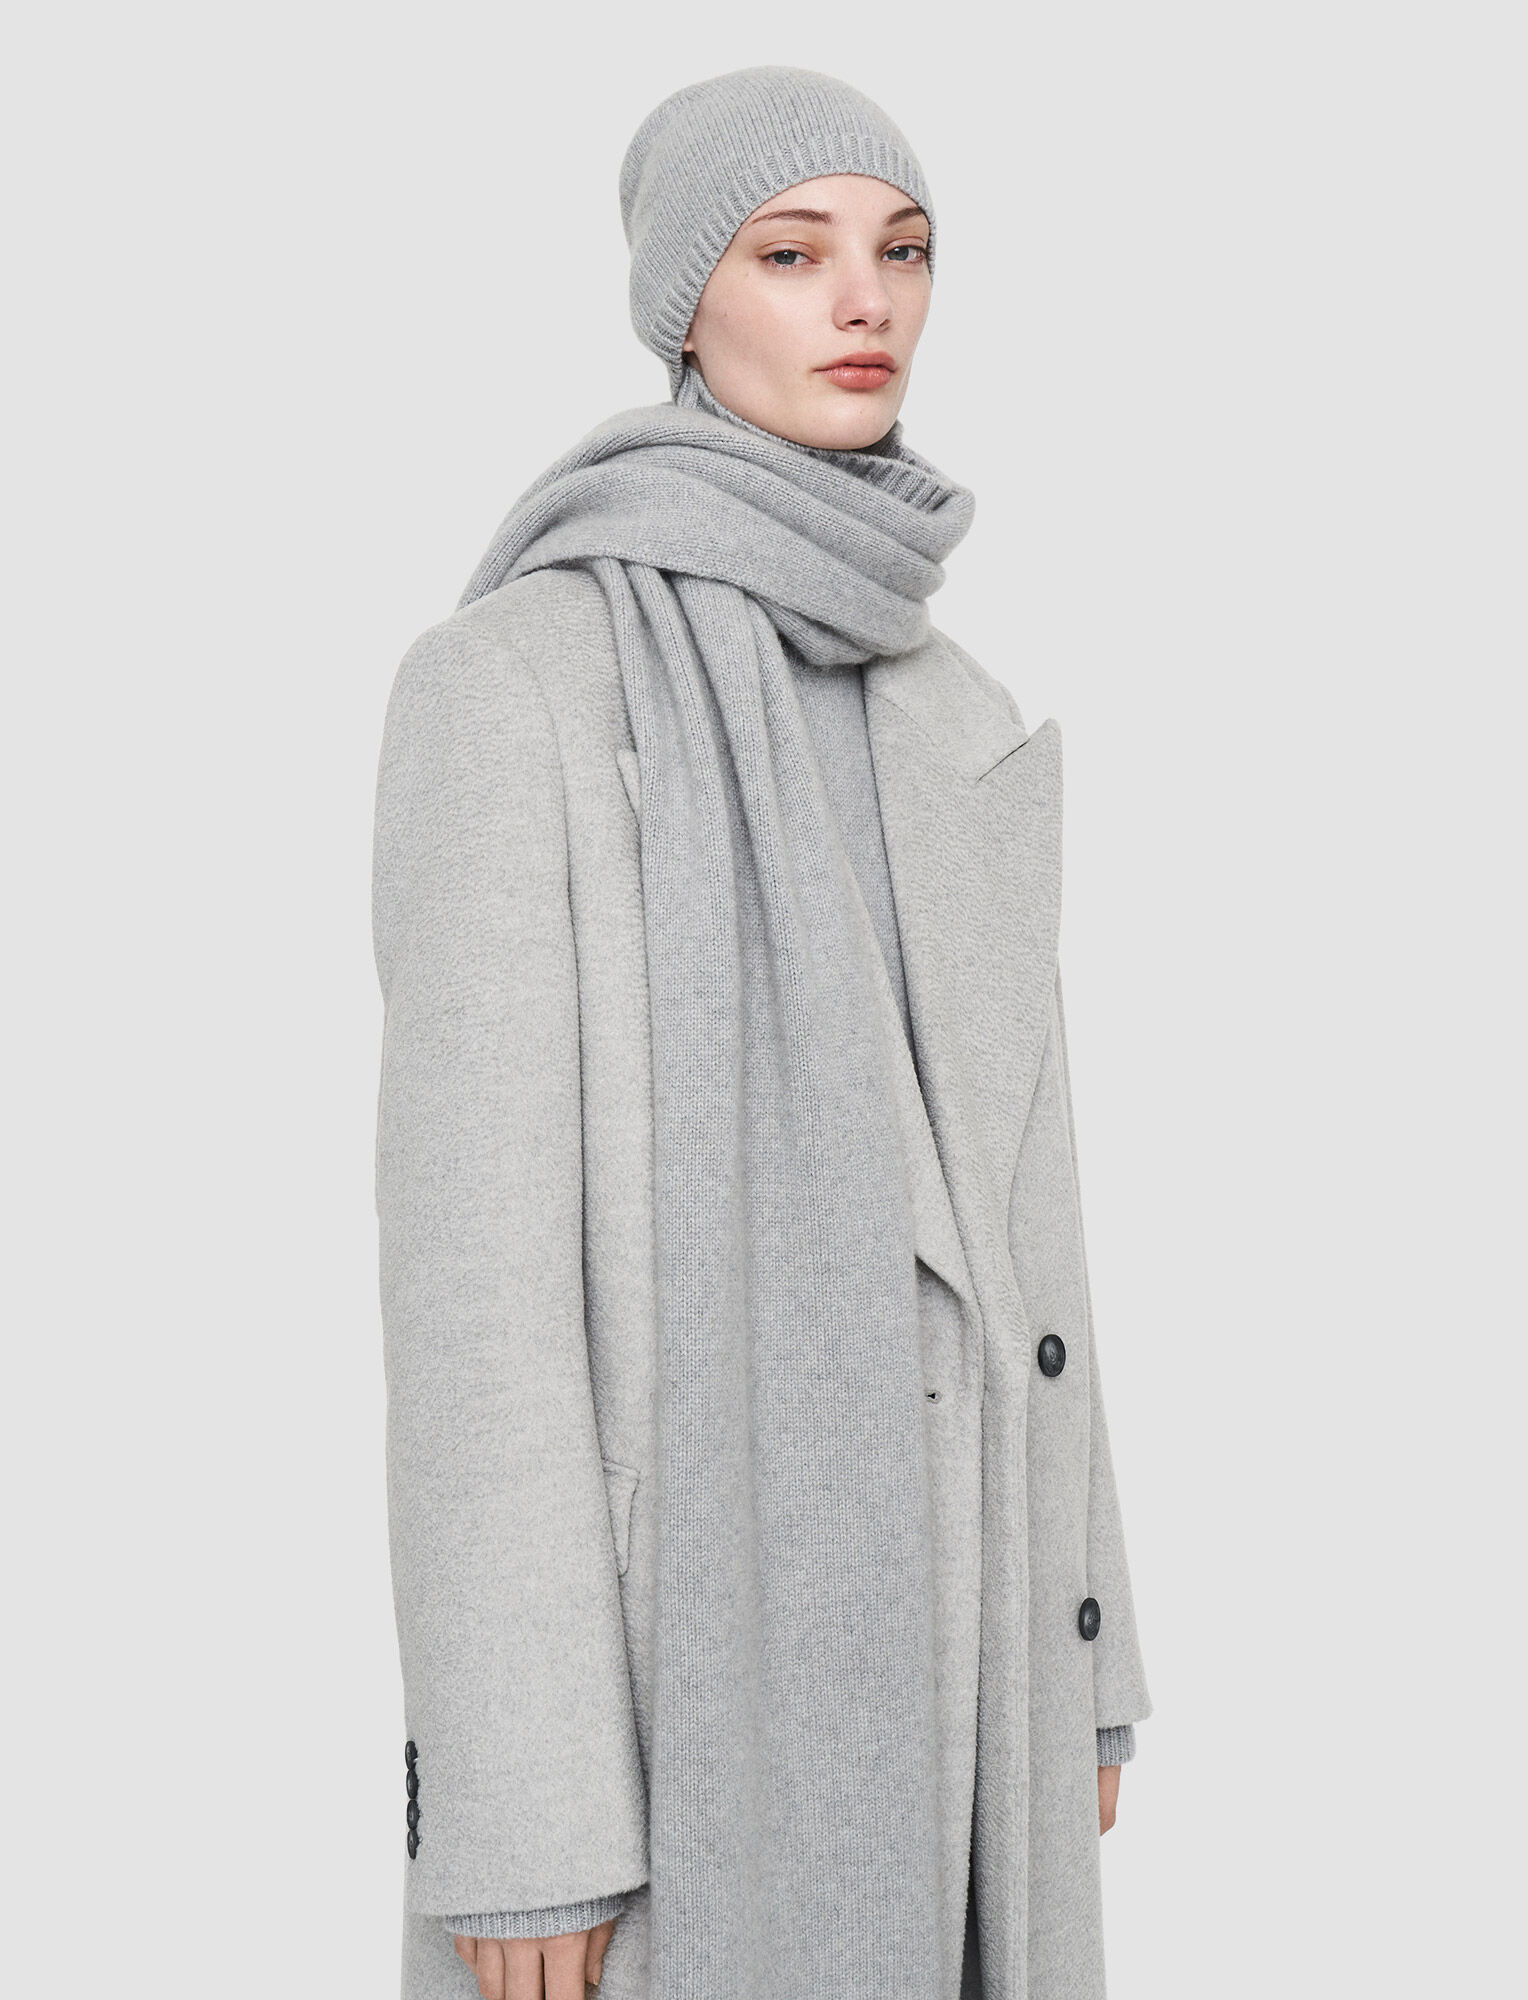 Luxe Cashmere Hat in Grey | JOSEPH US